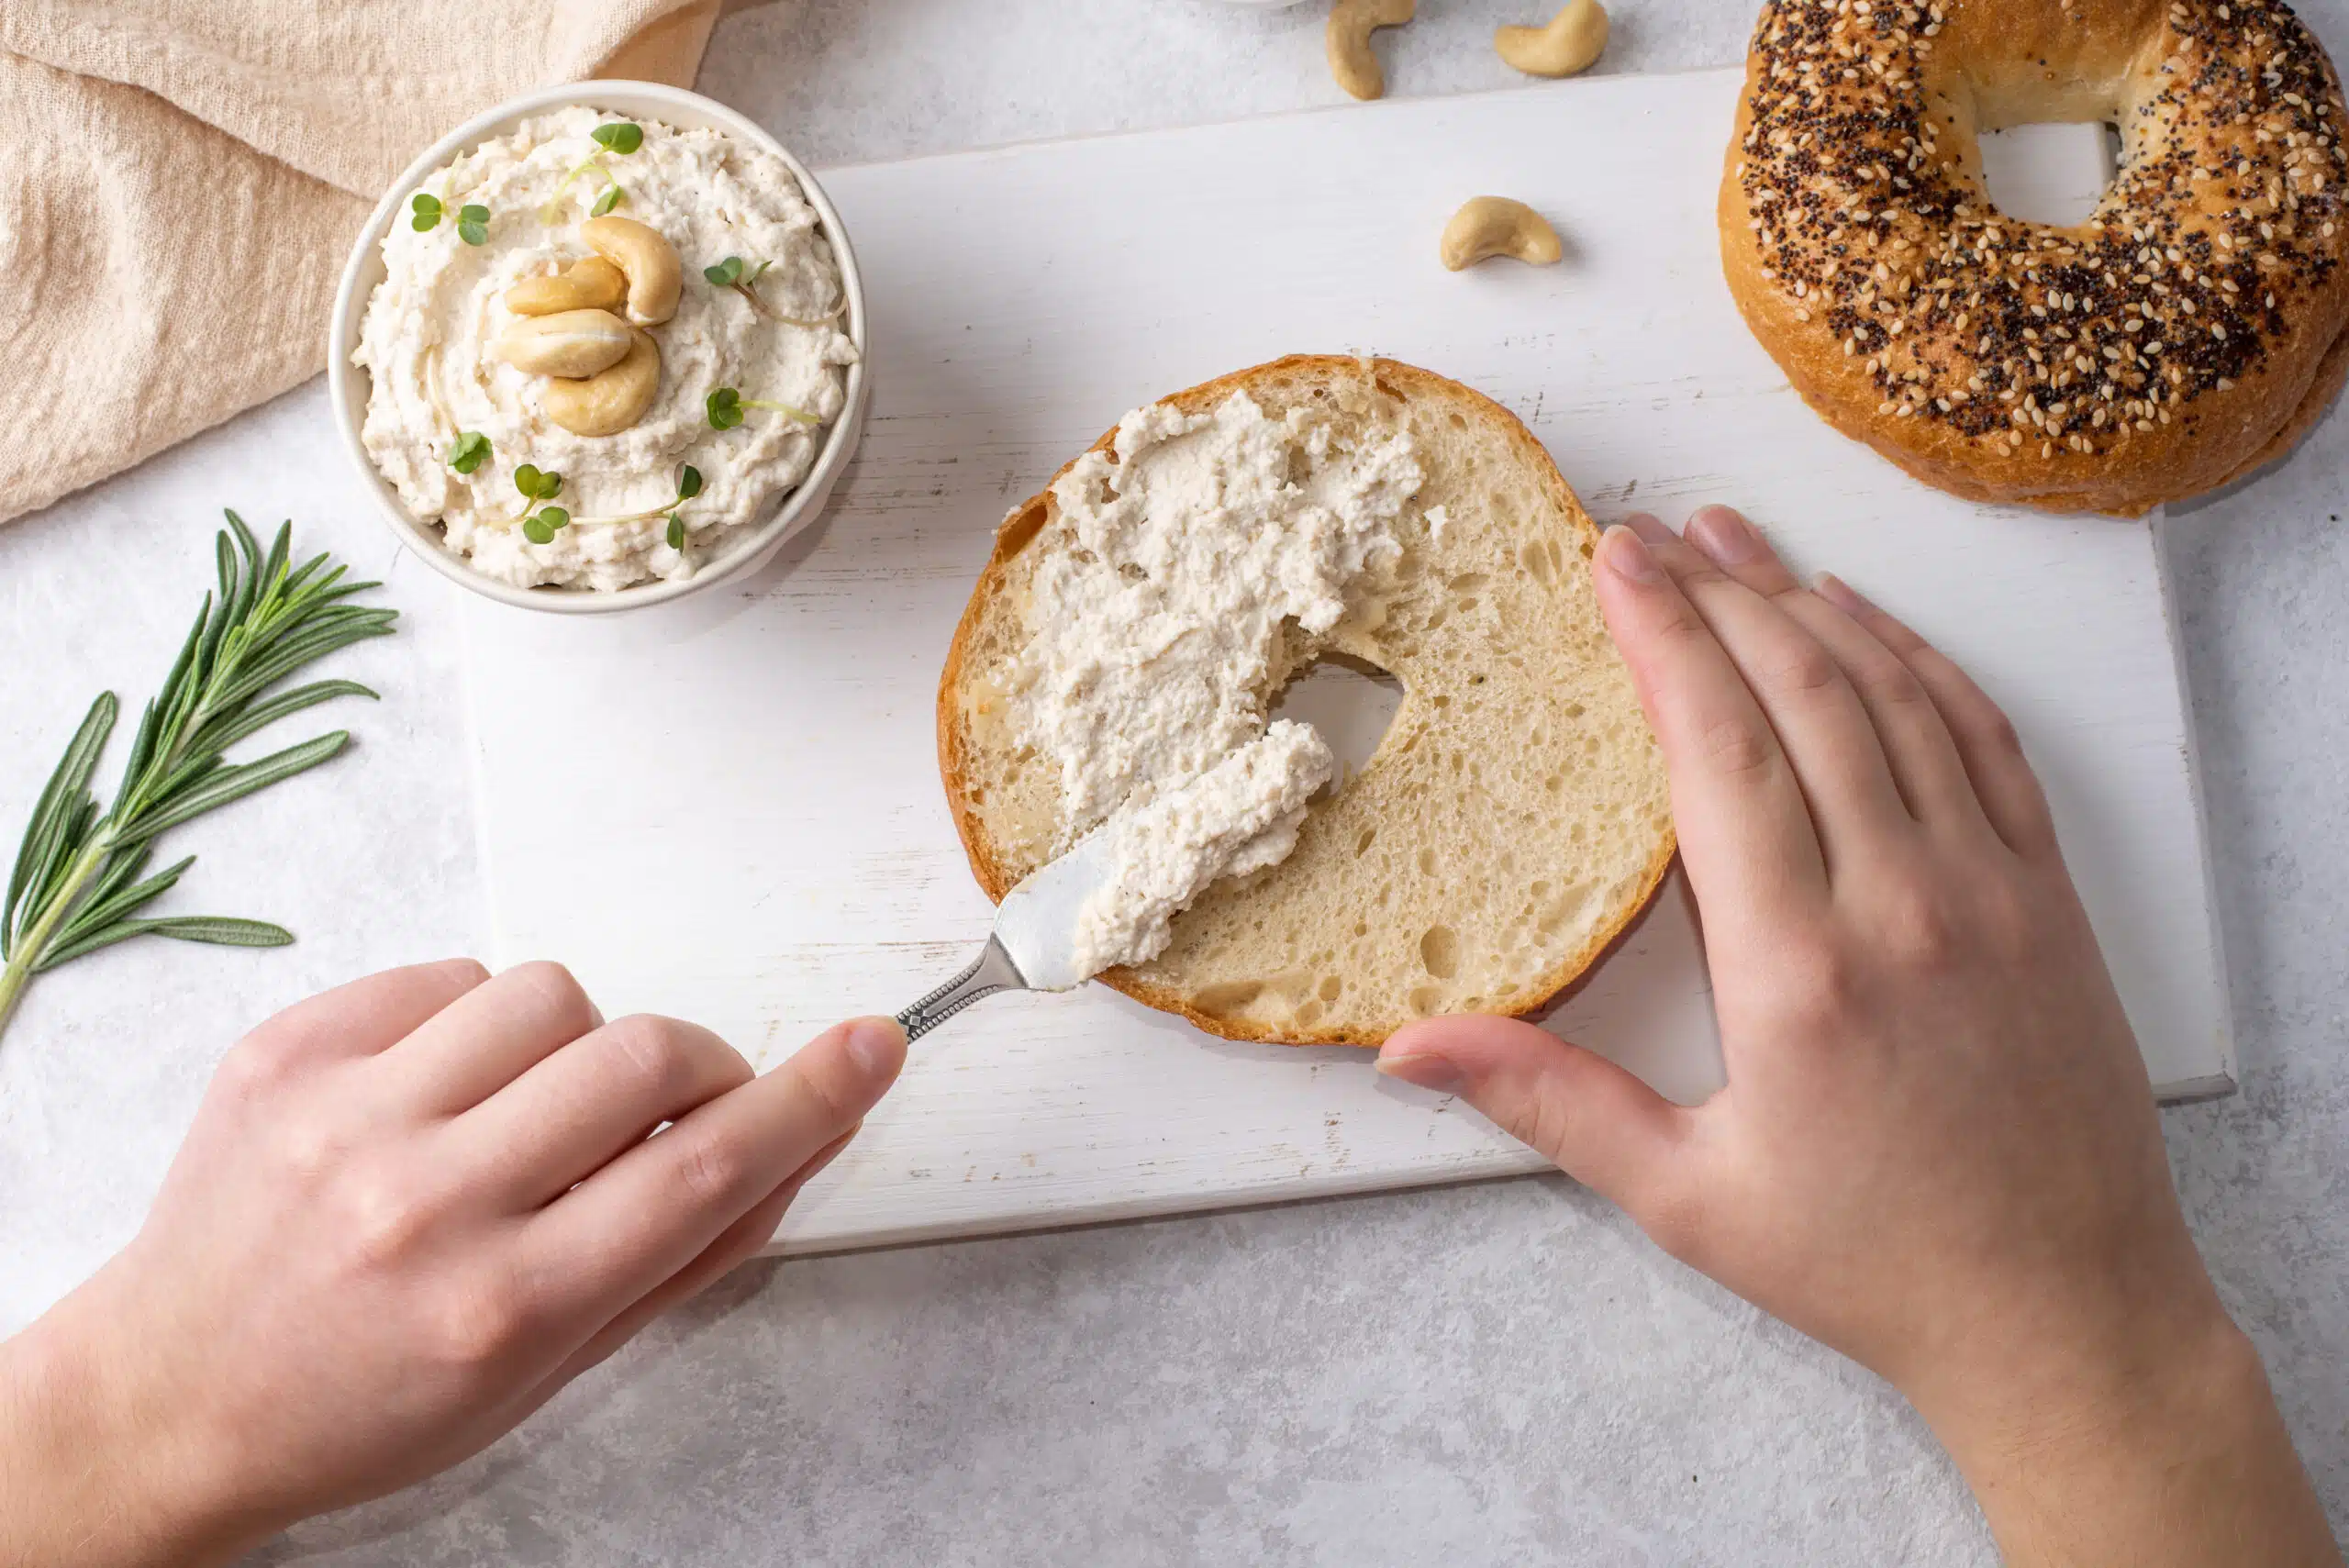 Female hands spreading cashew cheese on a bagel on a white table, fermented nuts as an alternative to cream cheese.